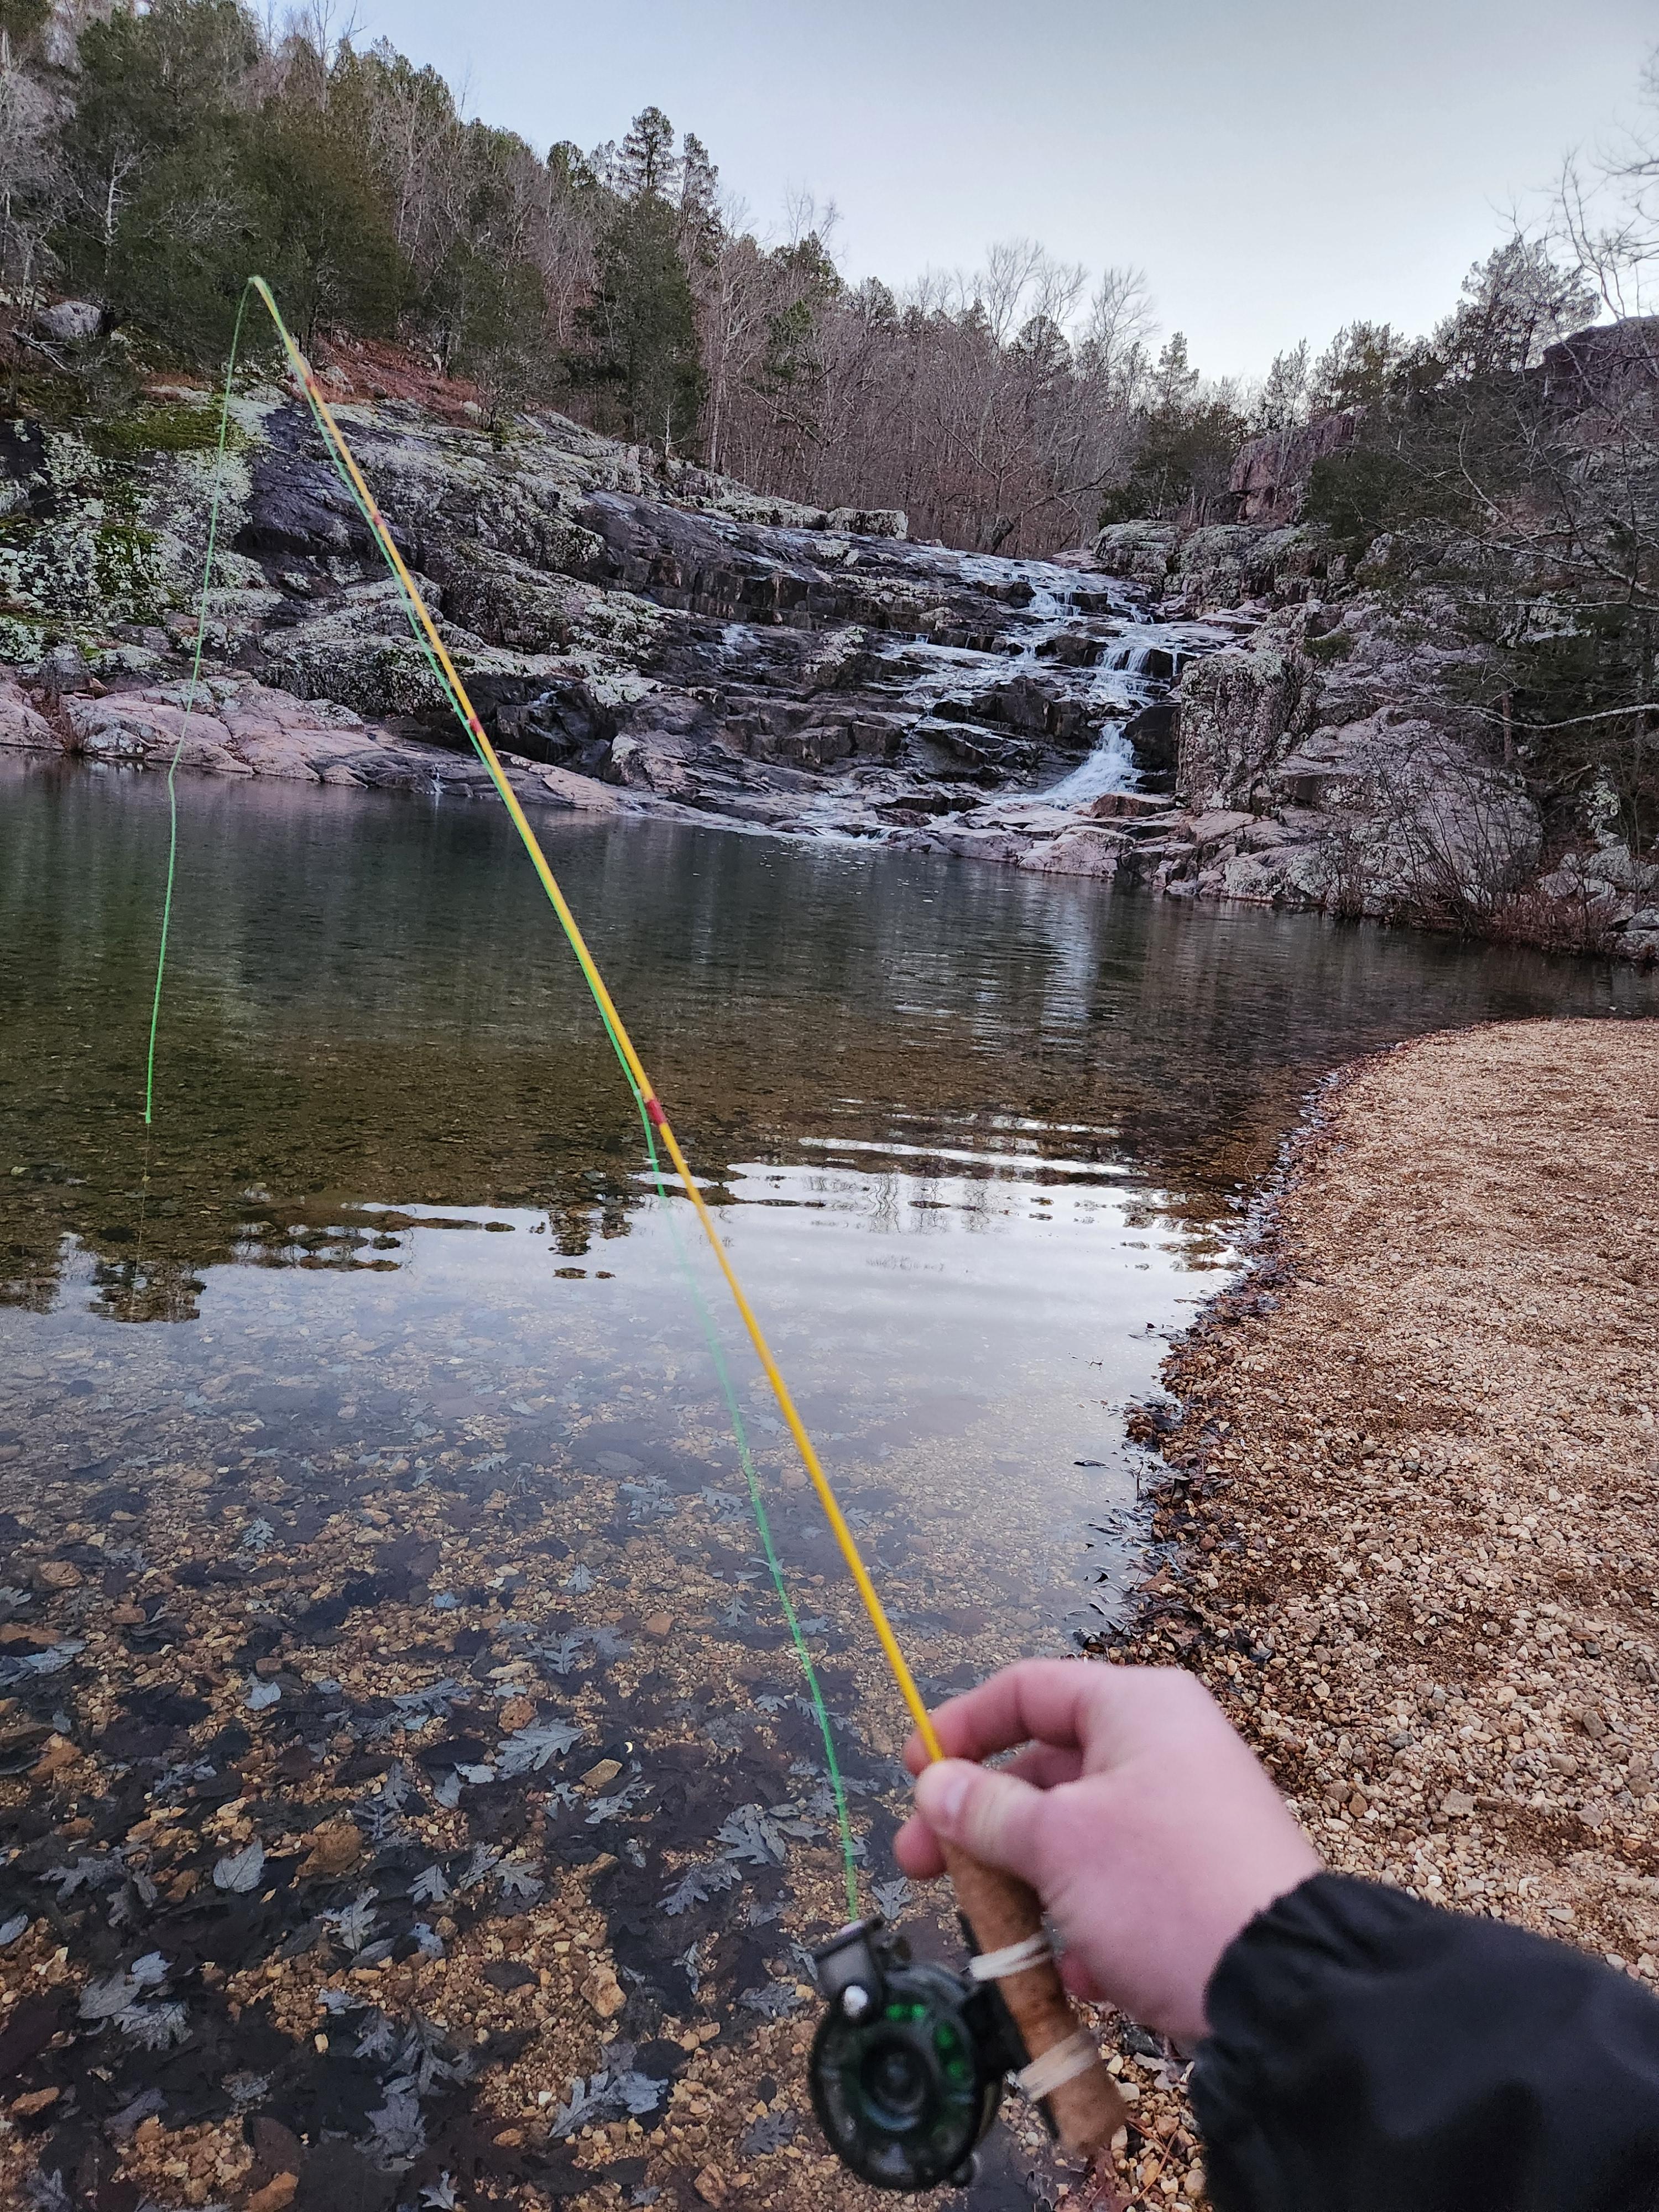 Micro fly rod. - General Angling Discussion - OzarkAnglers.Com Forum